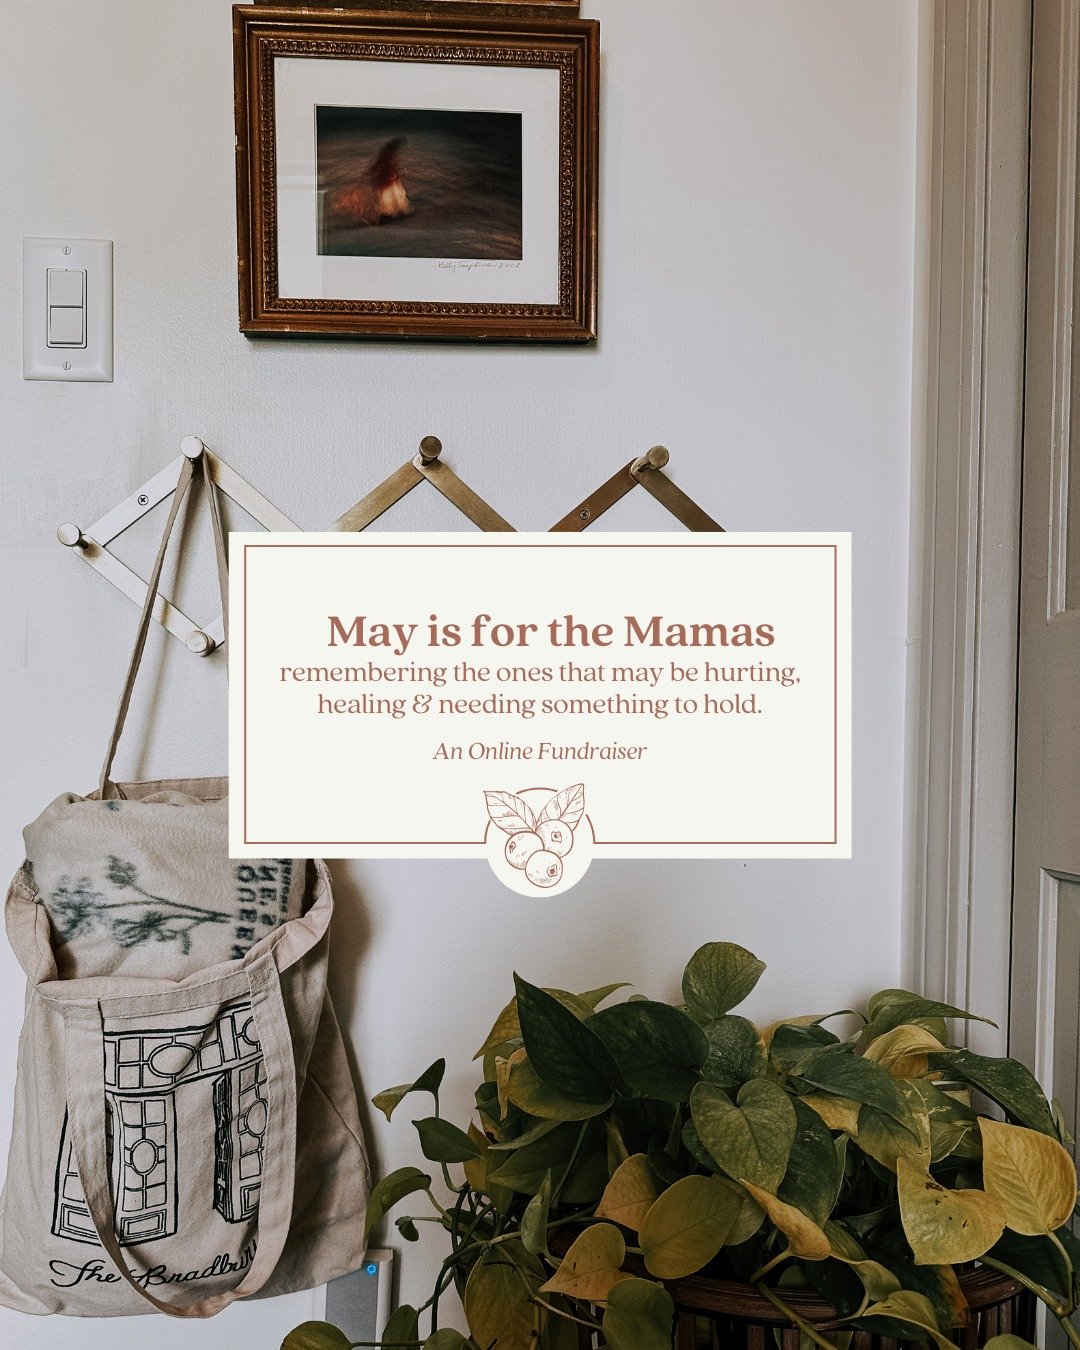 May is for the Mamas fundraiser

Remembering the ones that may be hurting, healing &amp; needing something to hold.👼

🌷For the month of May, to honor the community of mothers that may be hurting &amp; healing we are hosting our largest online fundr